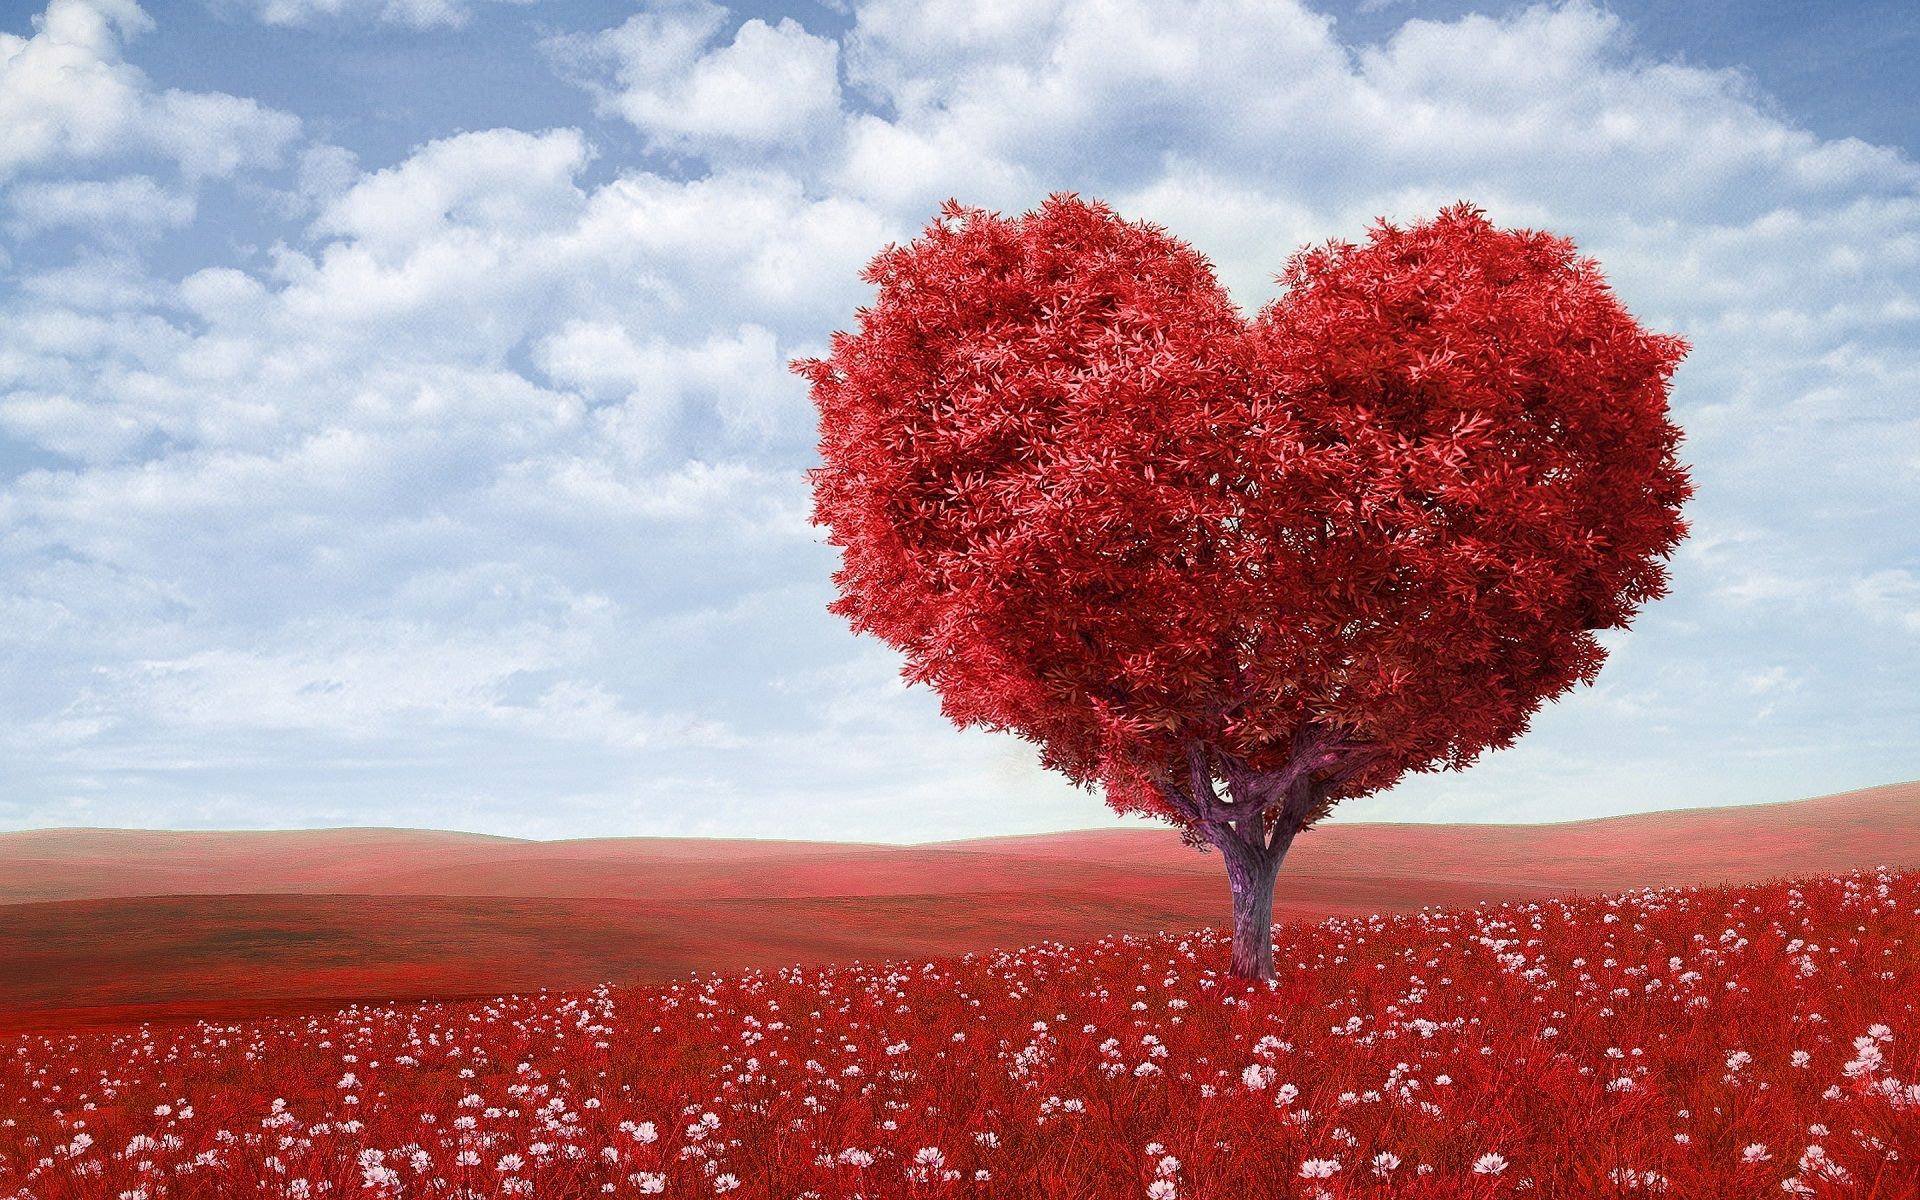 Heart Red Leafed Tree on Red Field · Free